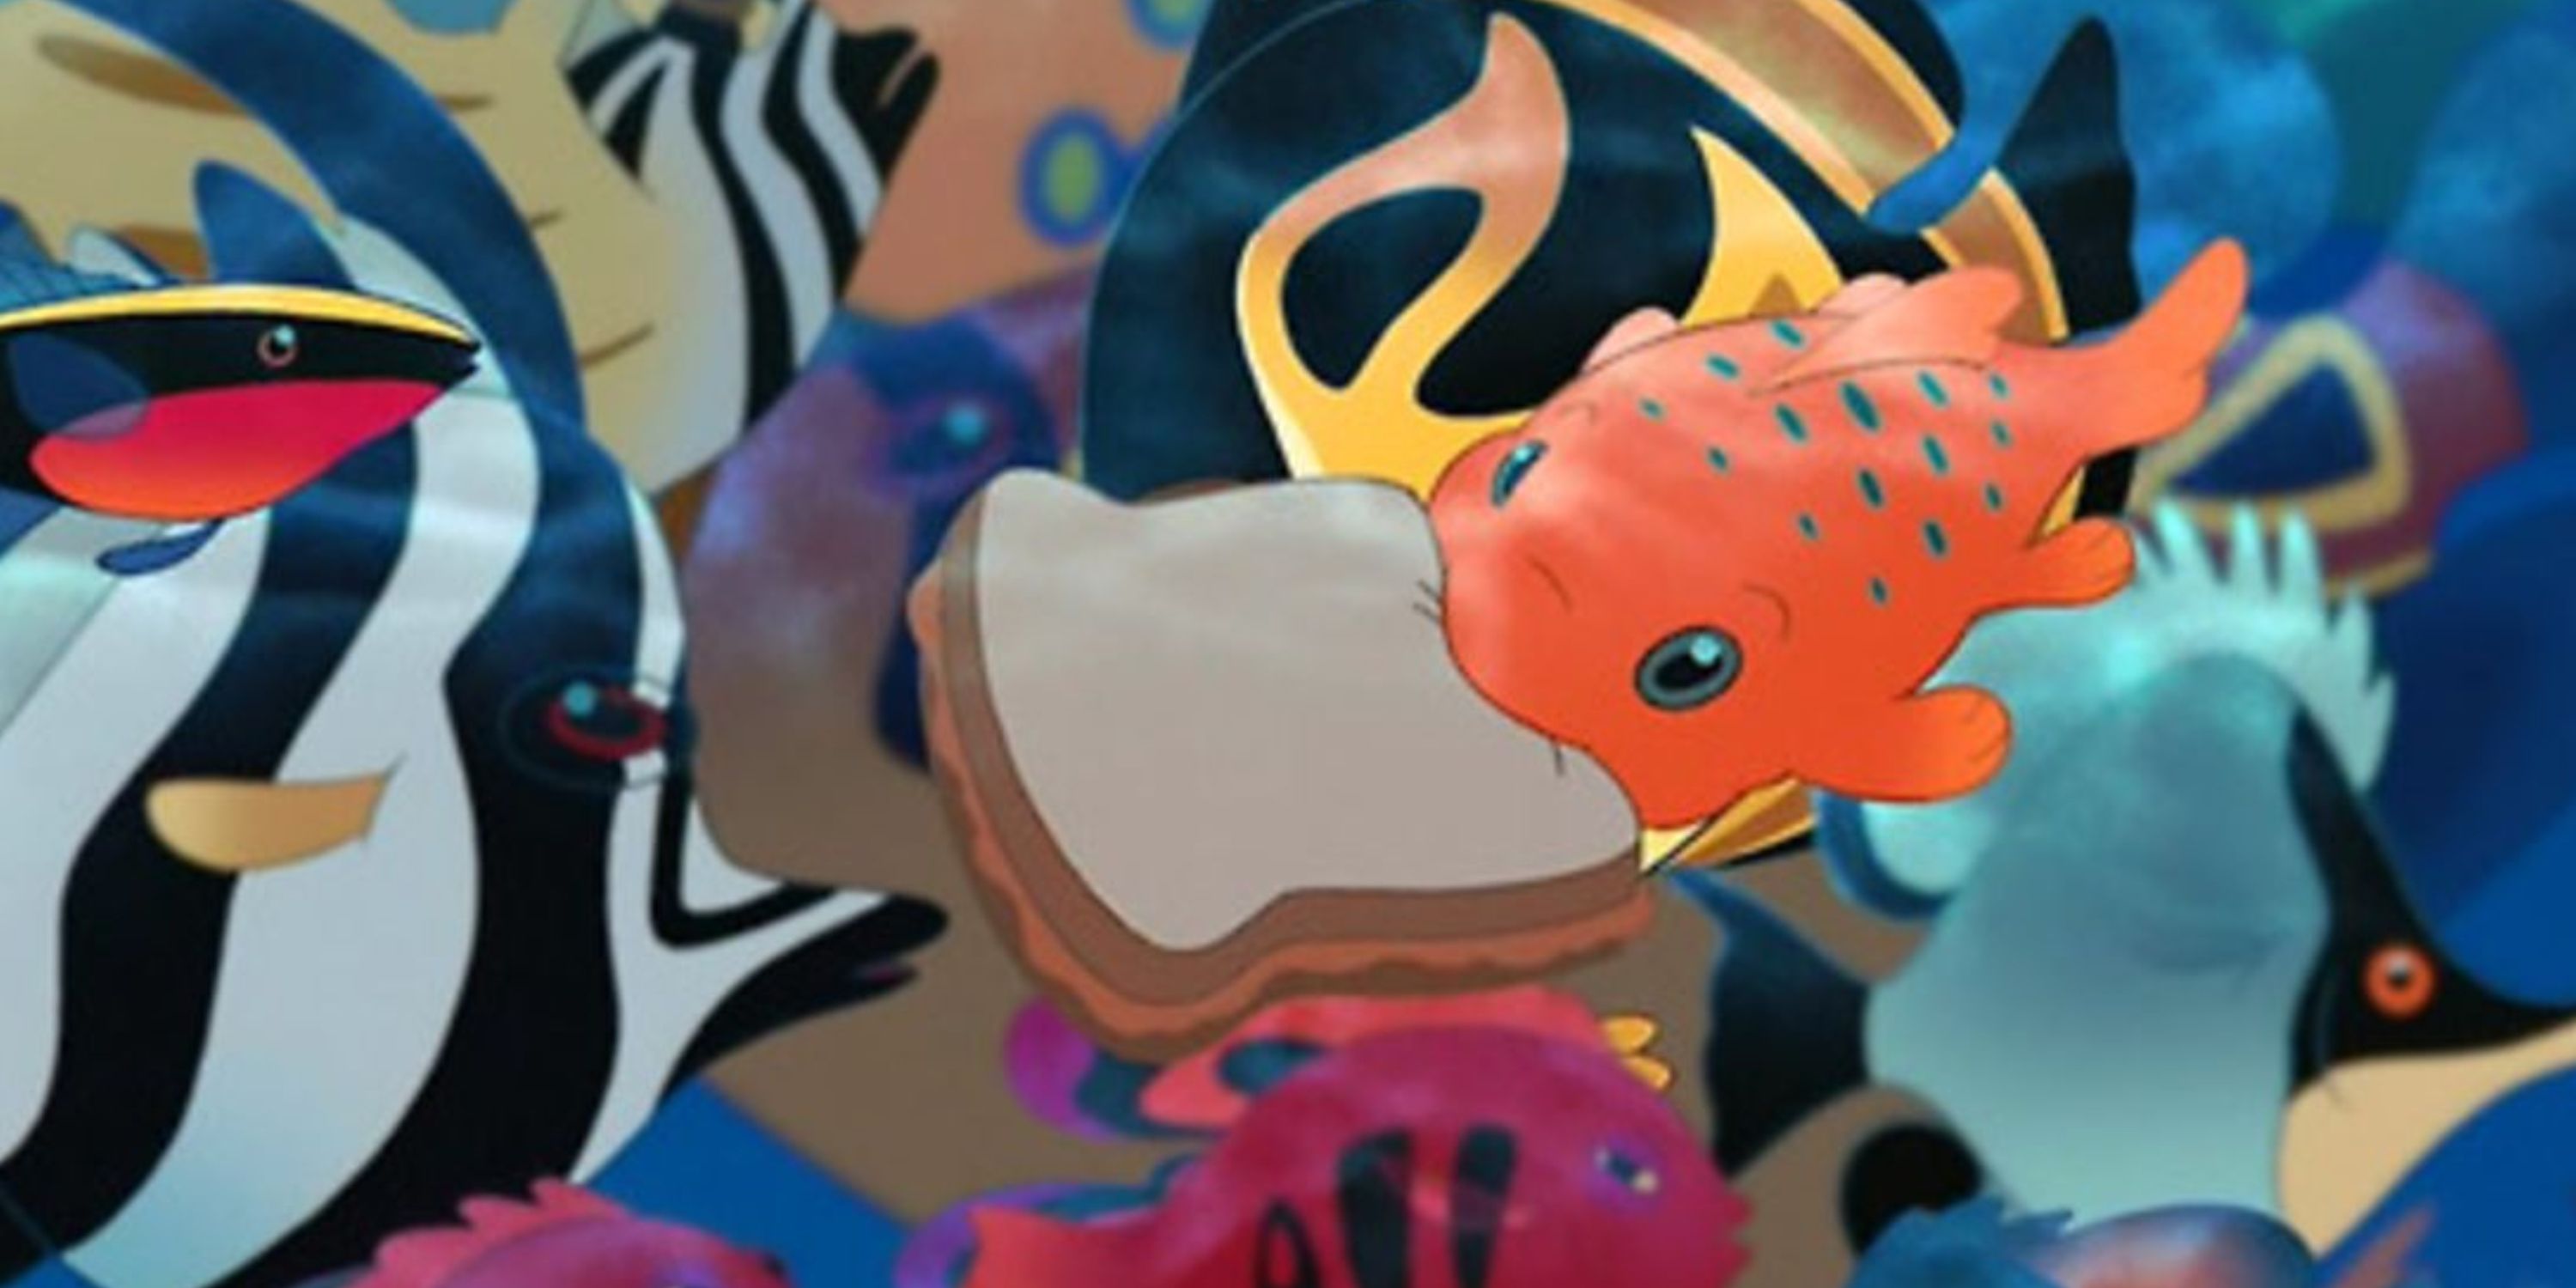 Pudge the fish with a sandwich in Lilo and Stitch (2002)